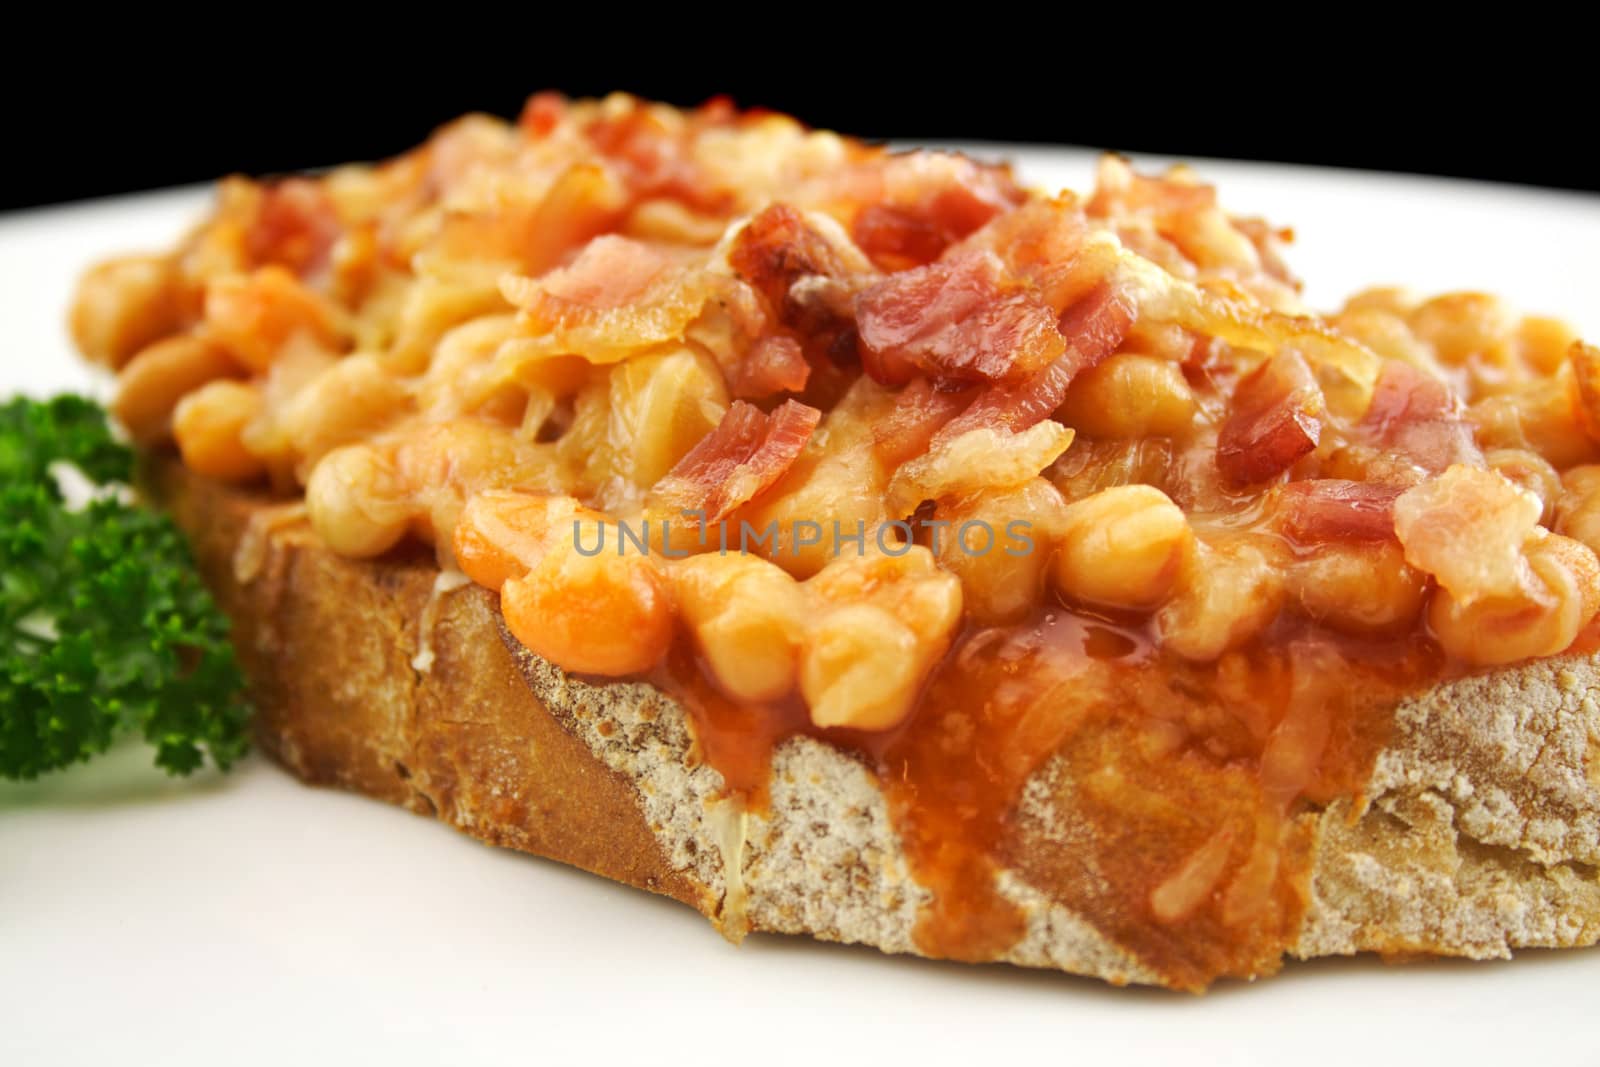 Delicious diced bacon with baked beans on sour dough bread.